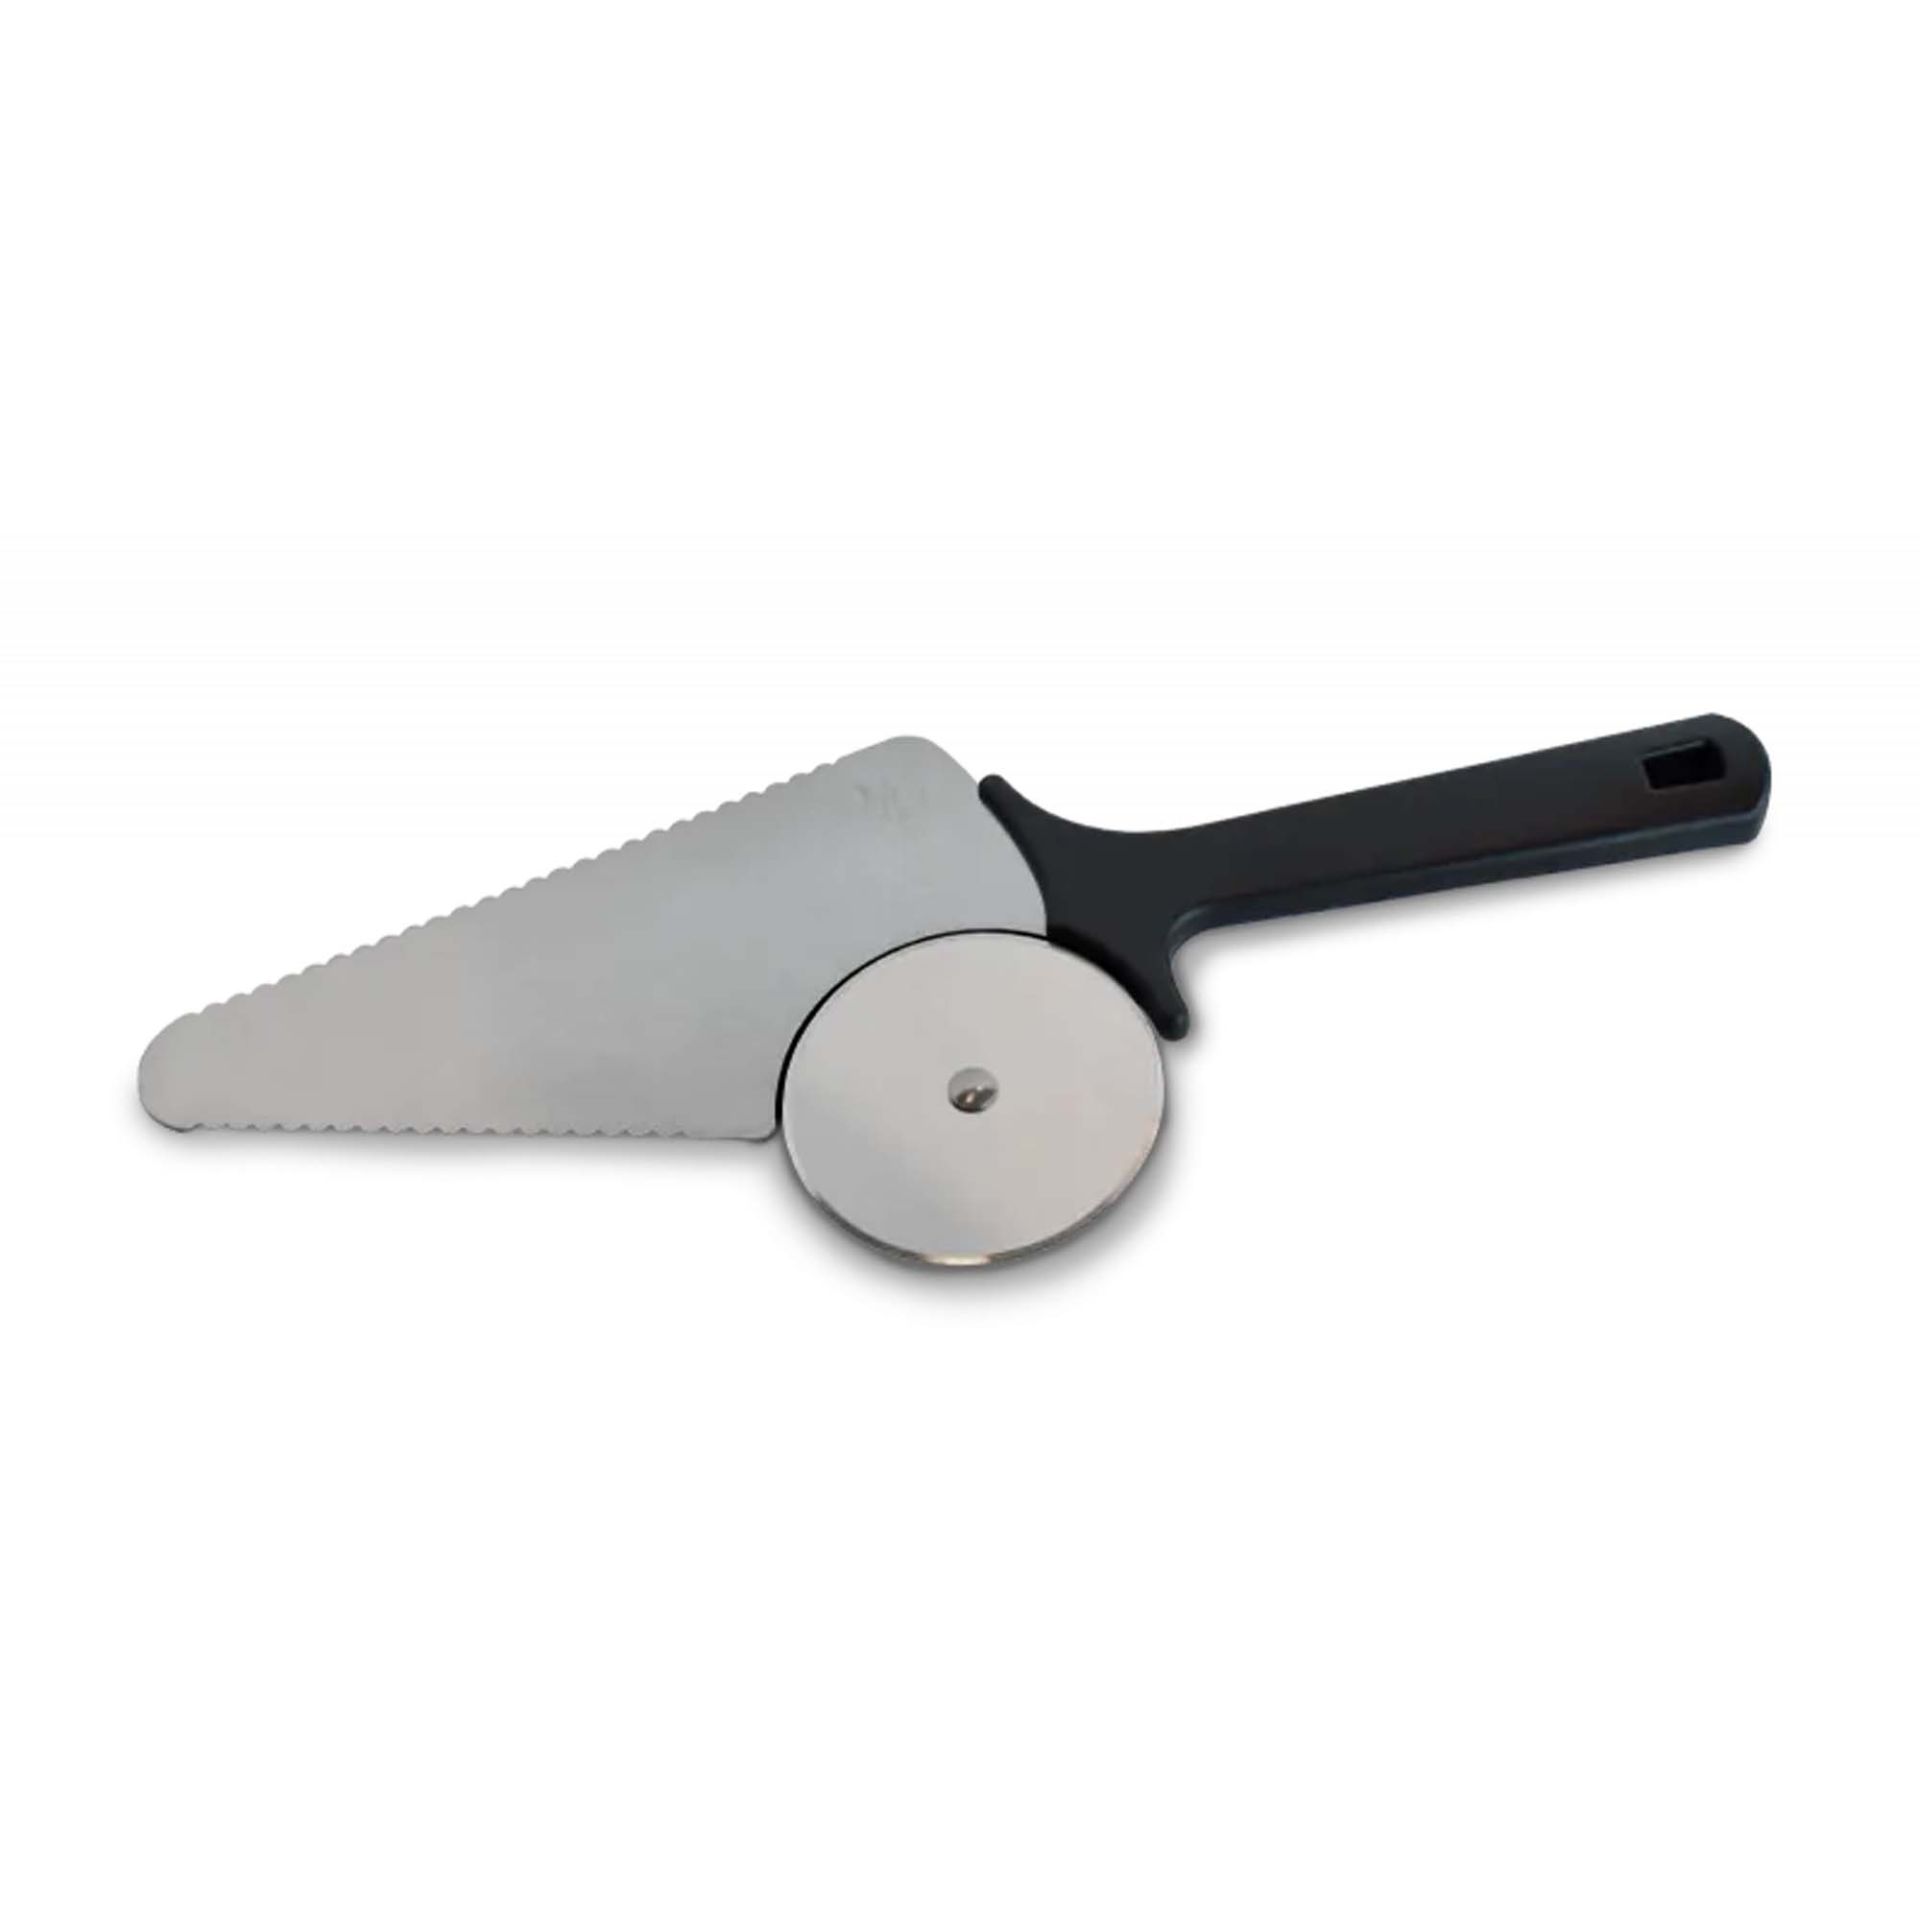 https://www.warentuin.nl/media/catalog/product/S/C/SCAN6001773118651_cadac_barbecue_accesoires_pizza_slicer_2_in_1_6fff.jpg